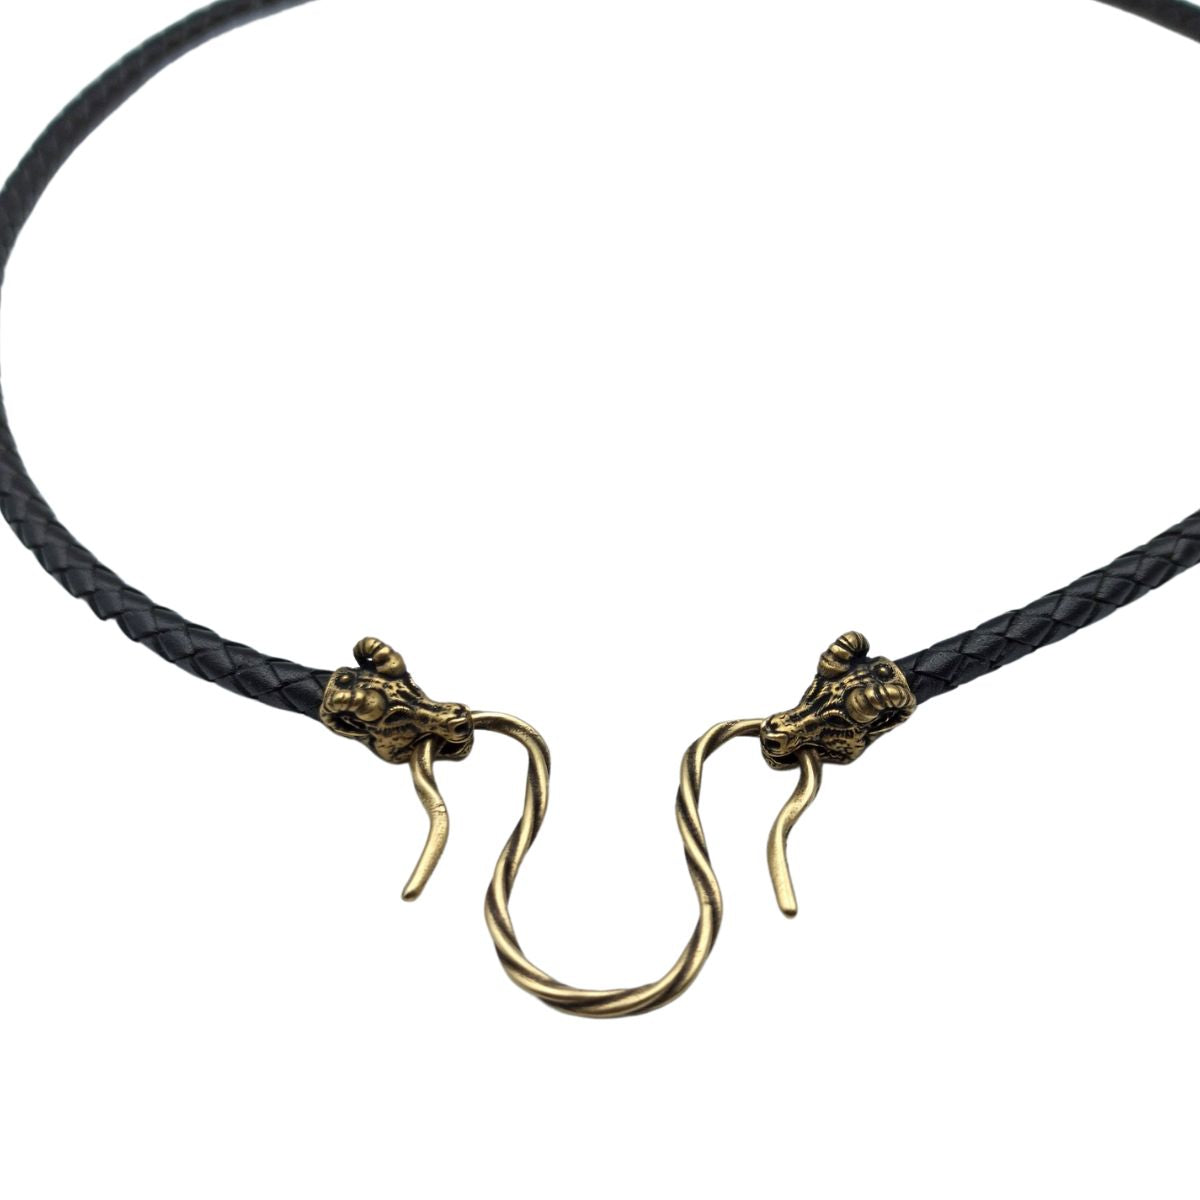 Norse goat leather necklace with Bronze clasps 45 cm | 17 inch  